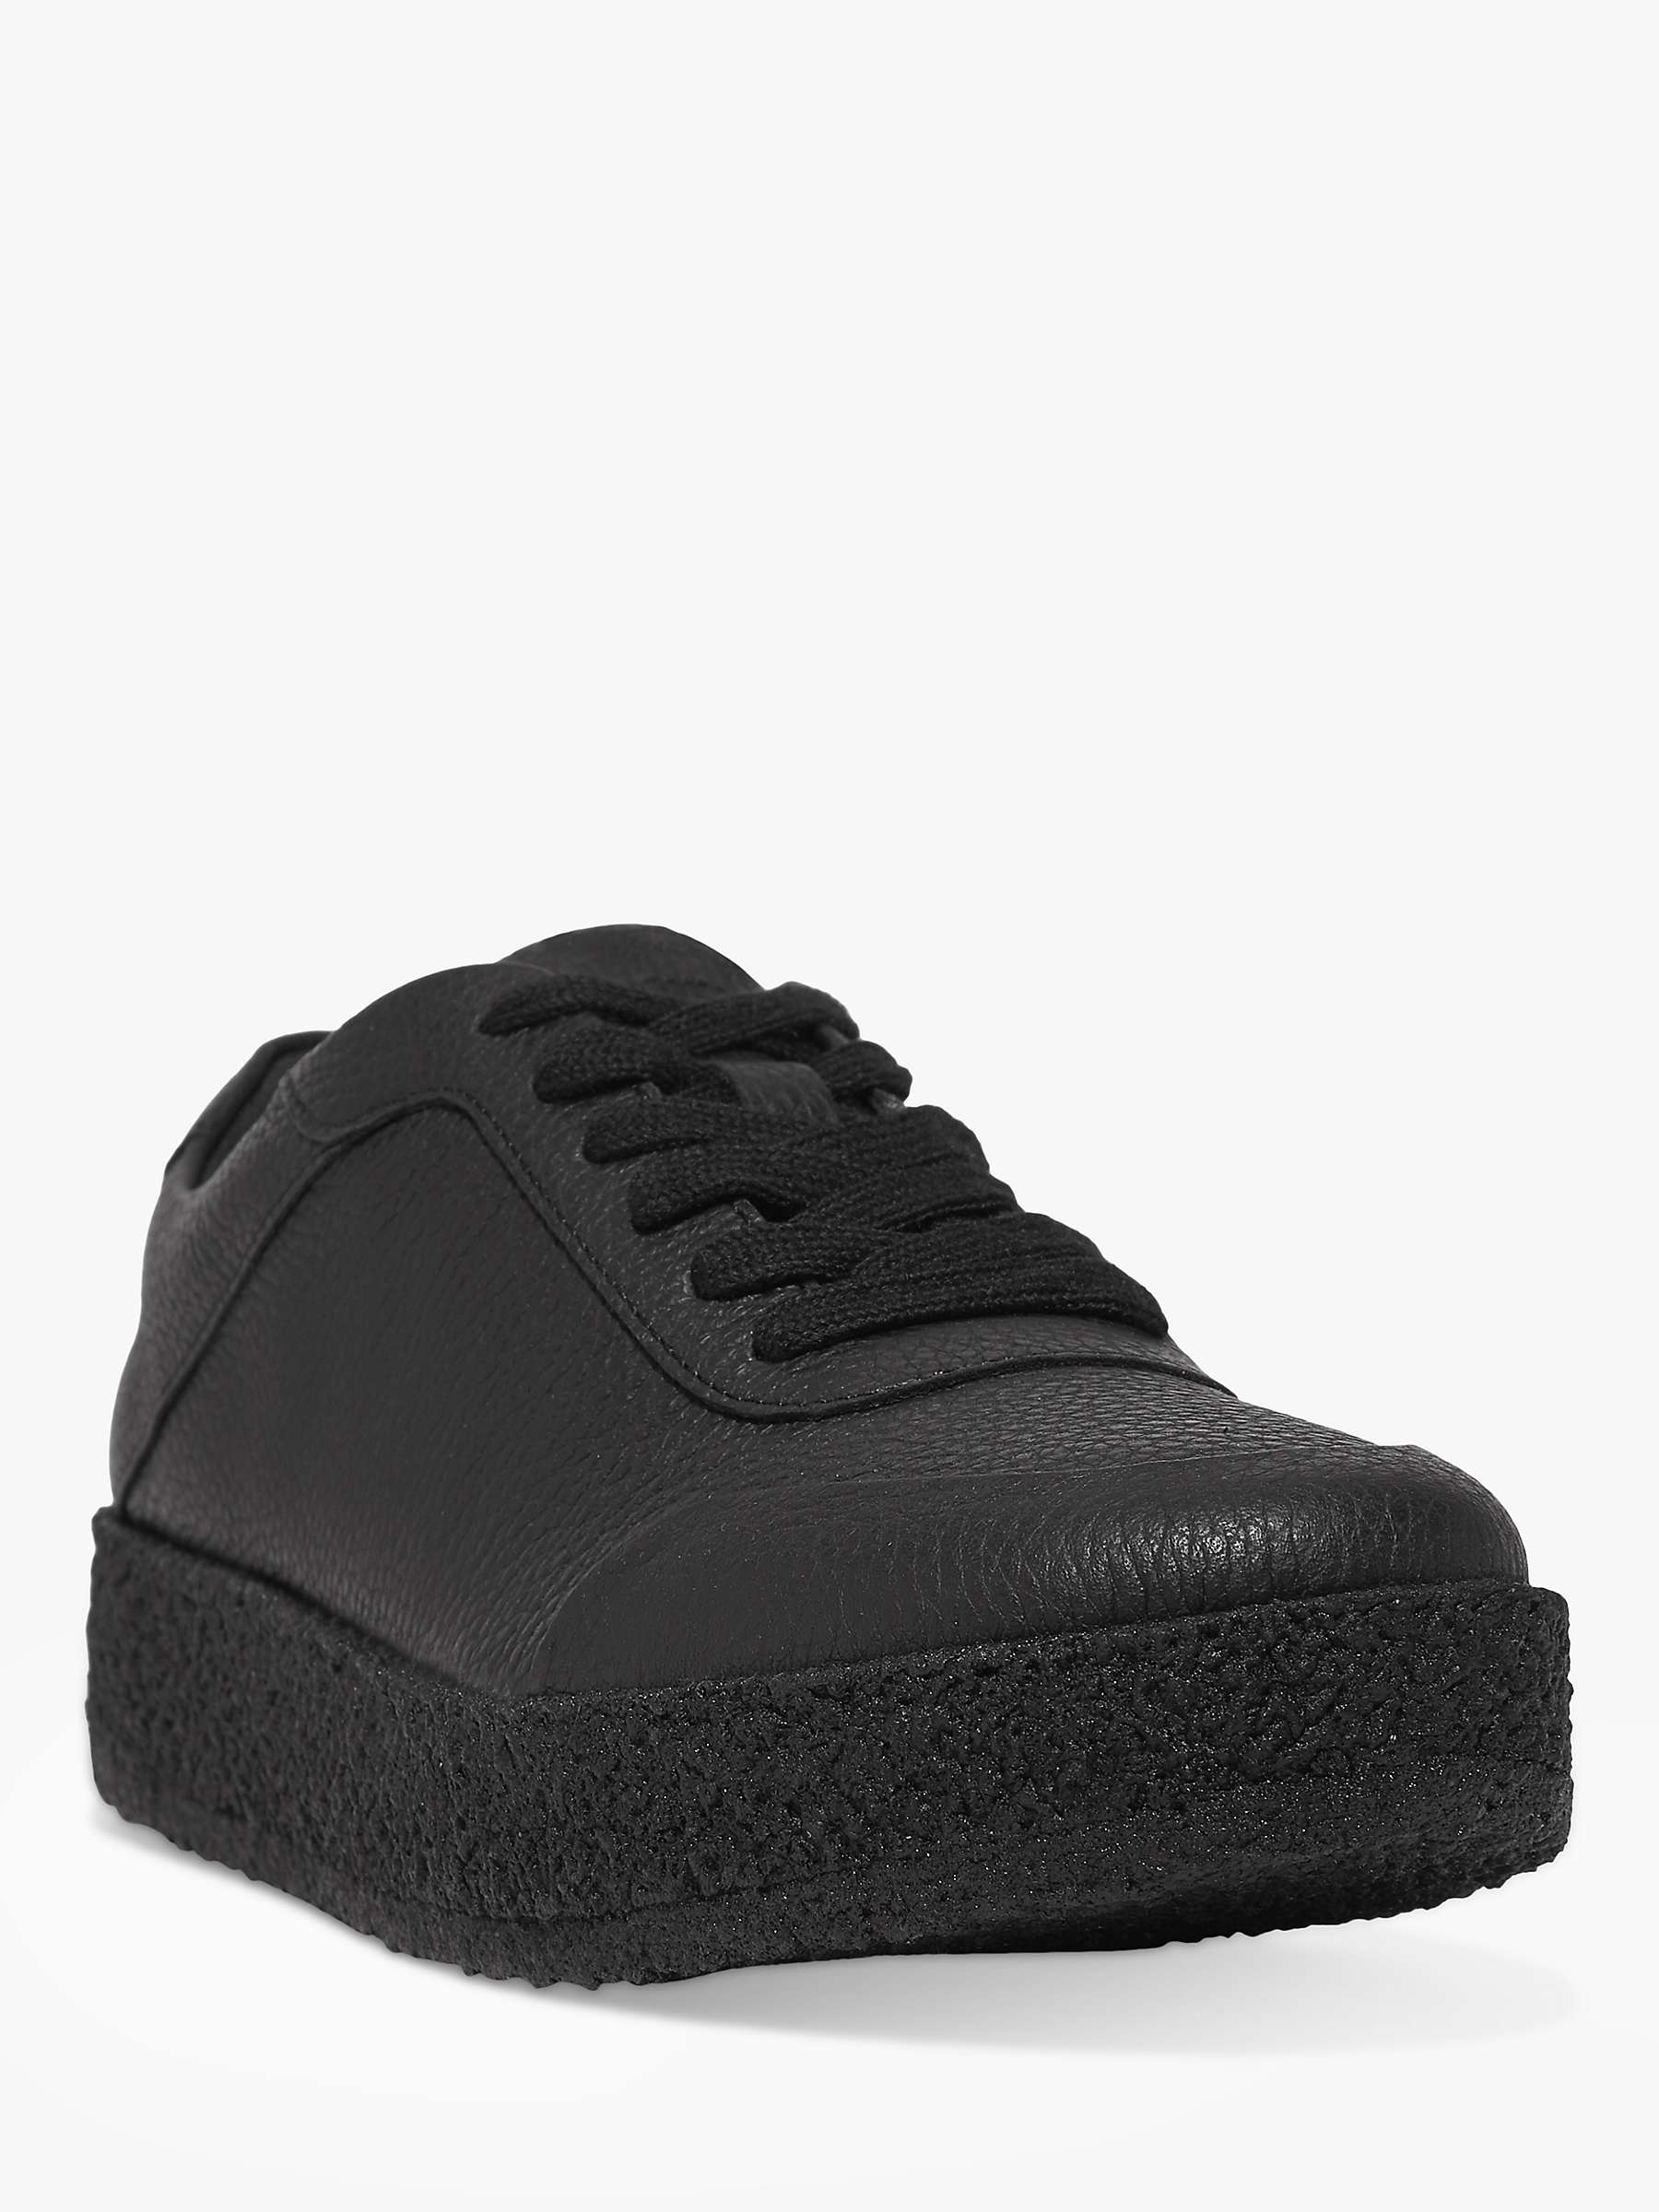 Buy FitFlop Rally Crepe Leather Trainers Online at johnlewis.com